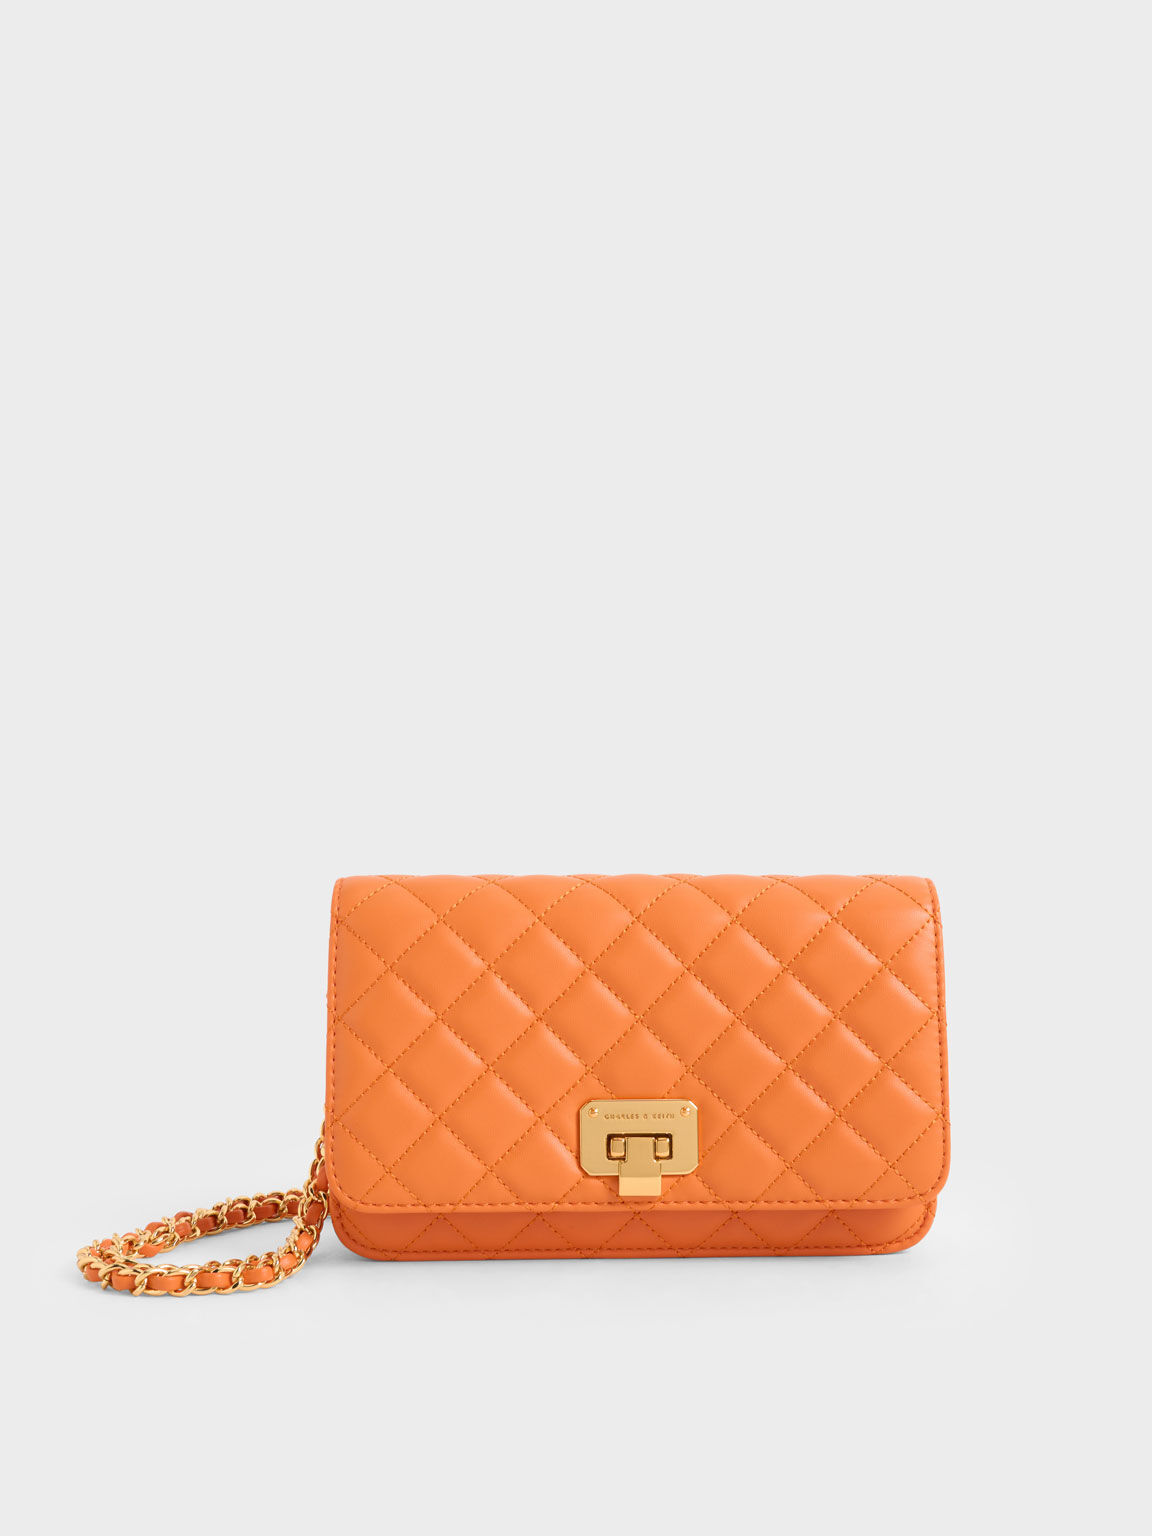 Women's Clutches | Shop Exclusive Styles | CHARLES & KEITH SG